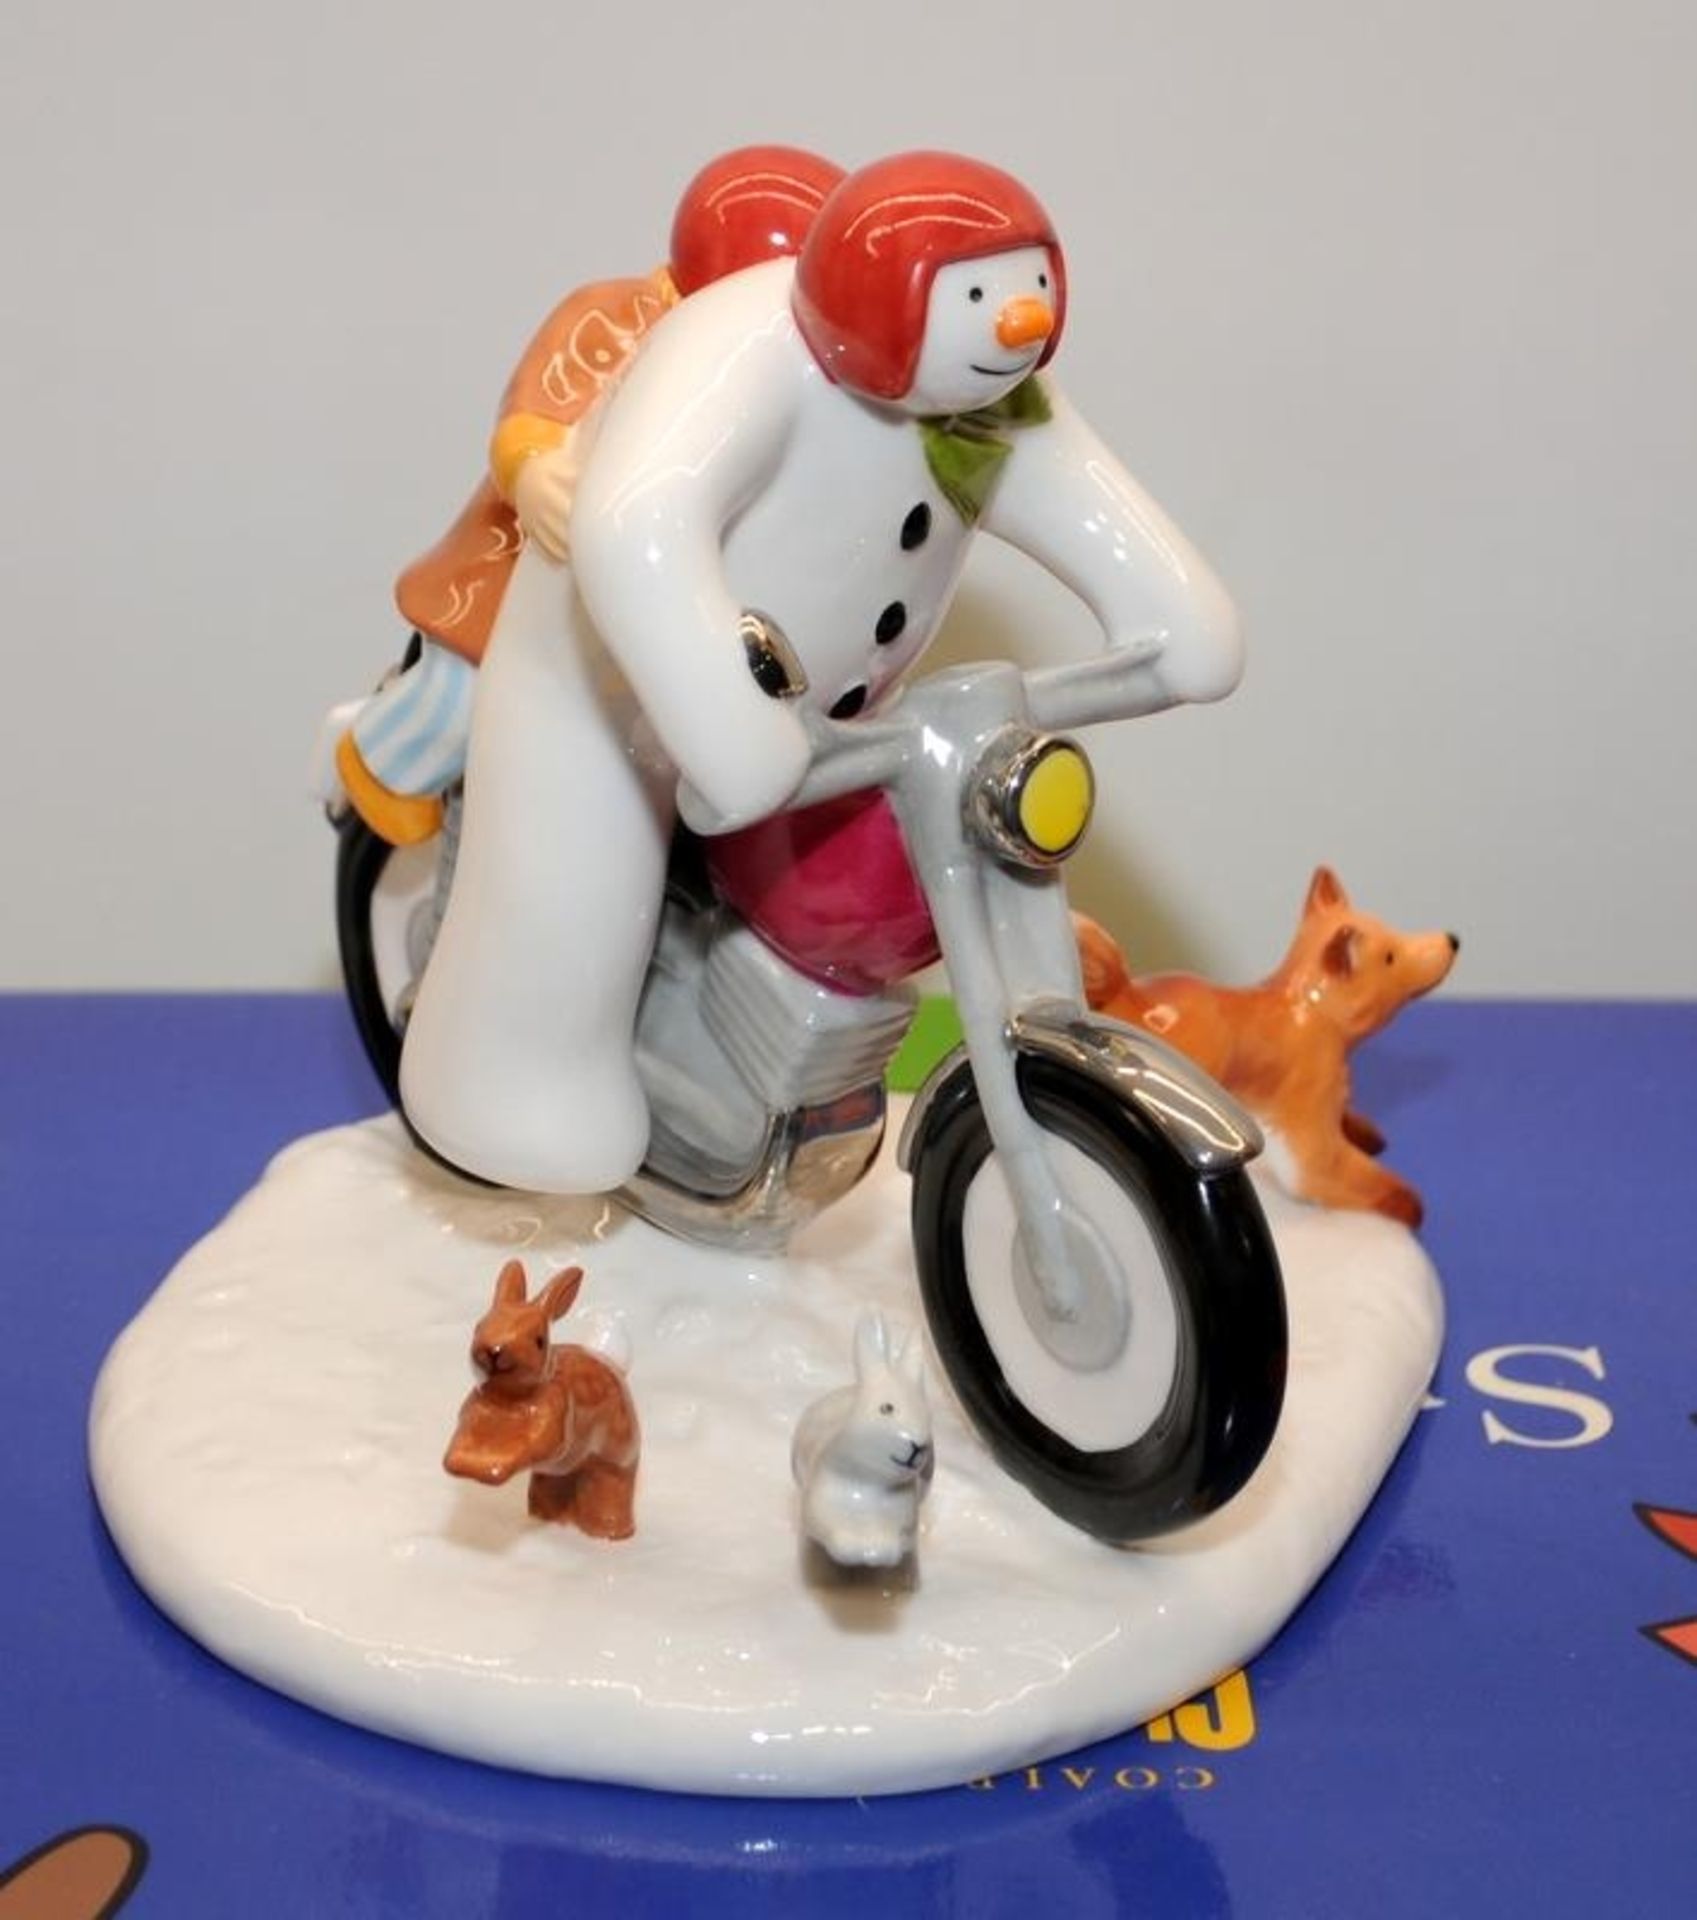 Coalport The Snowman Limited Edition Figurine: Hold On Tight, 693/2000. Boxed with certificate - Image 2 of 5